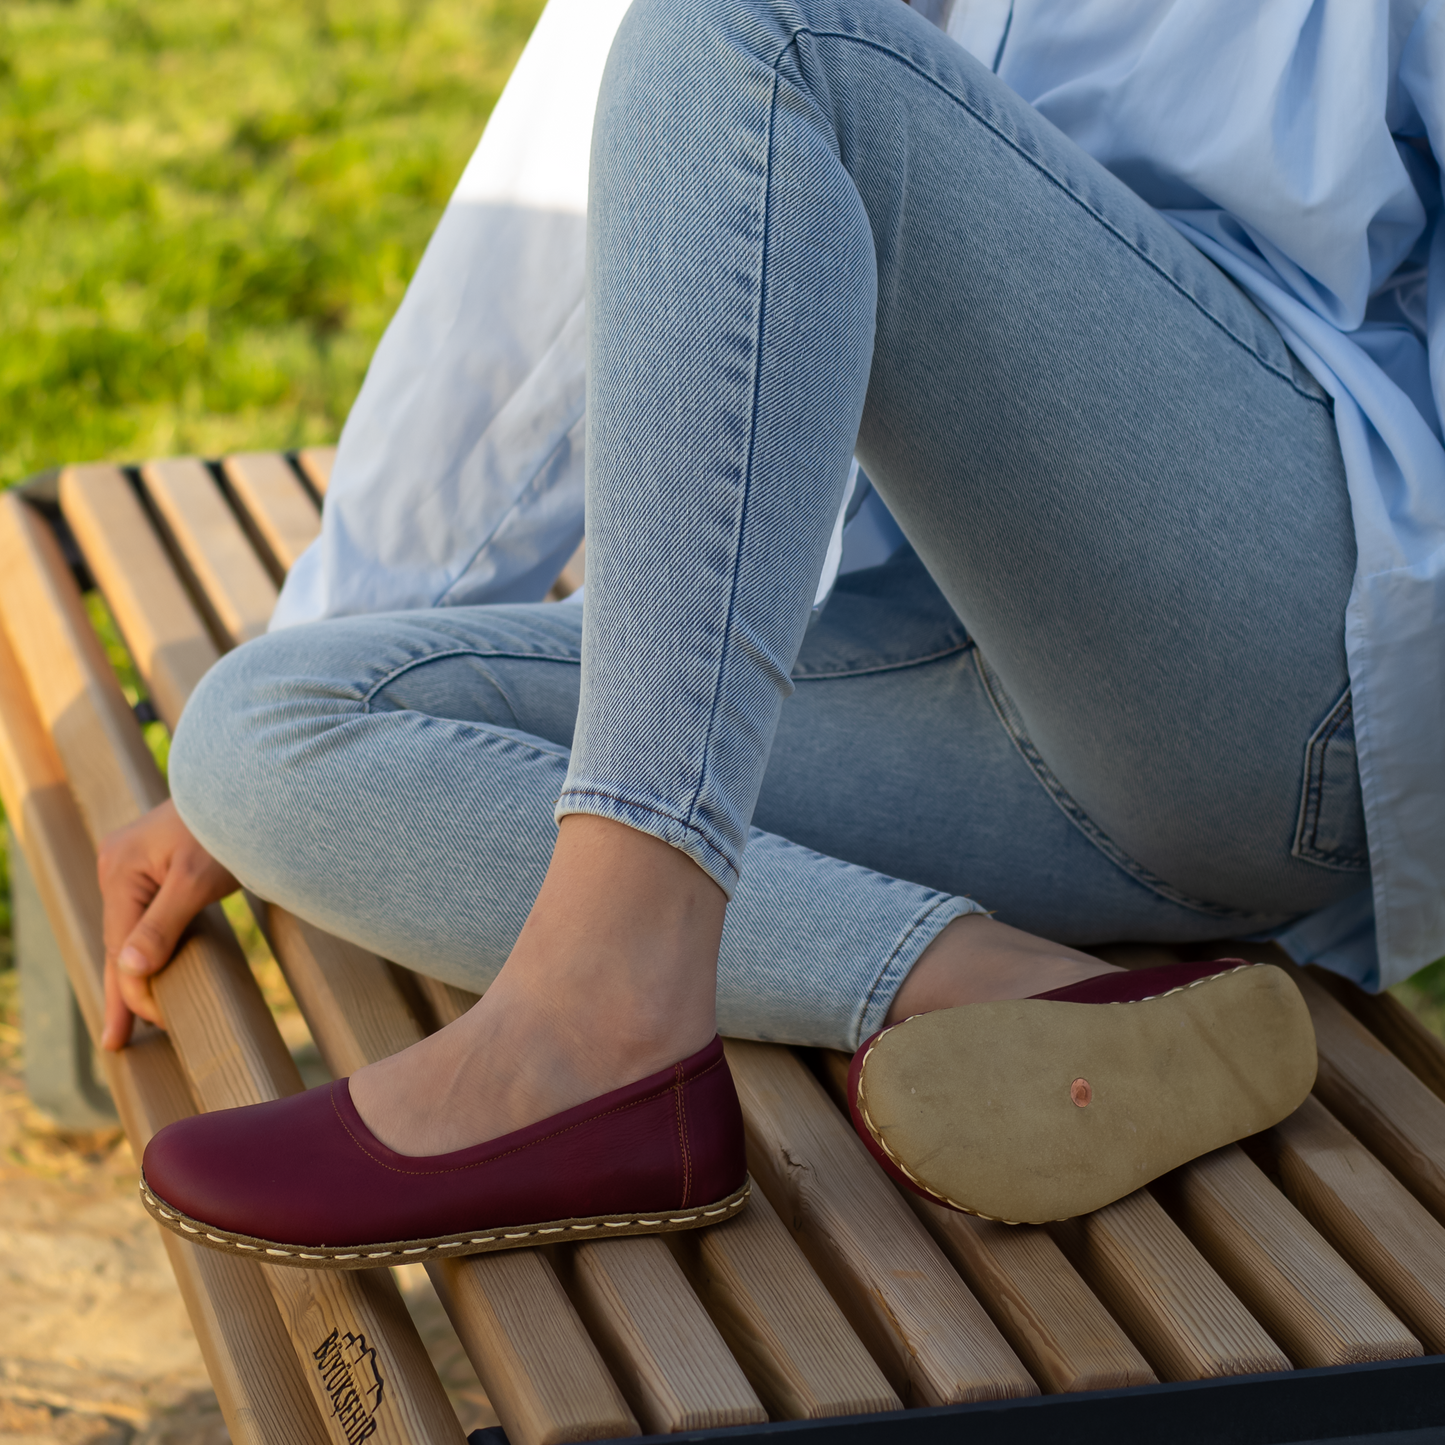 Handmade Barefoot Leather Shoes for Women in Burgundy-Nefes Shoes